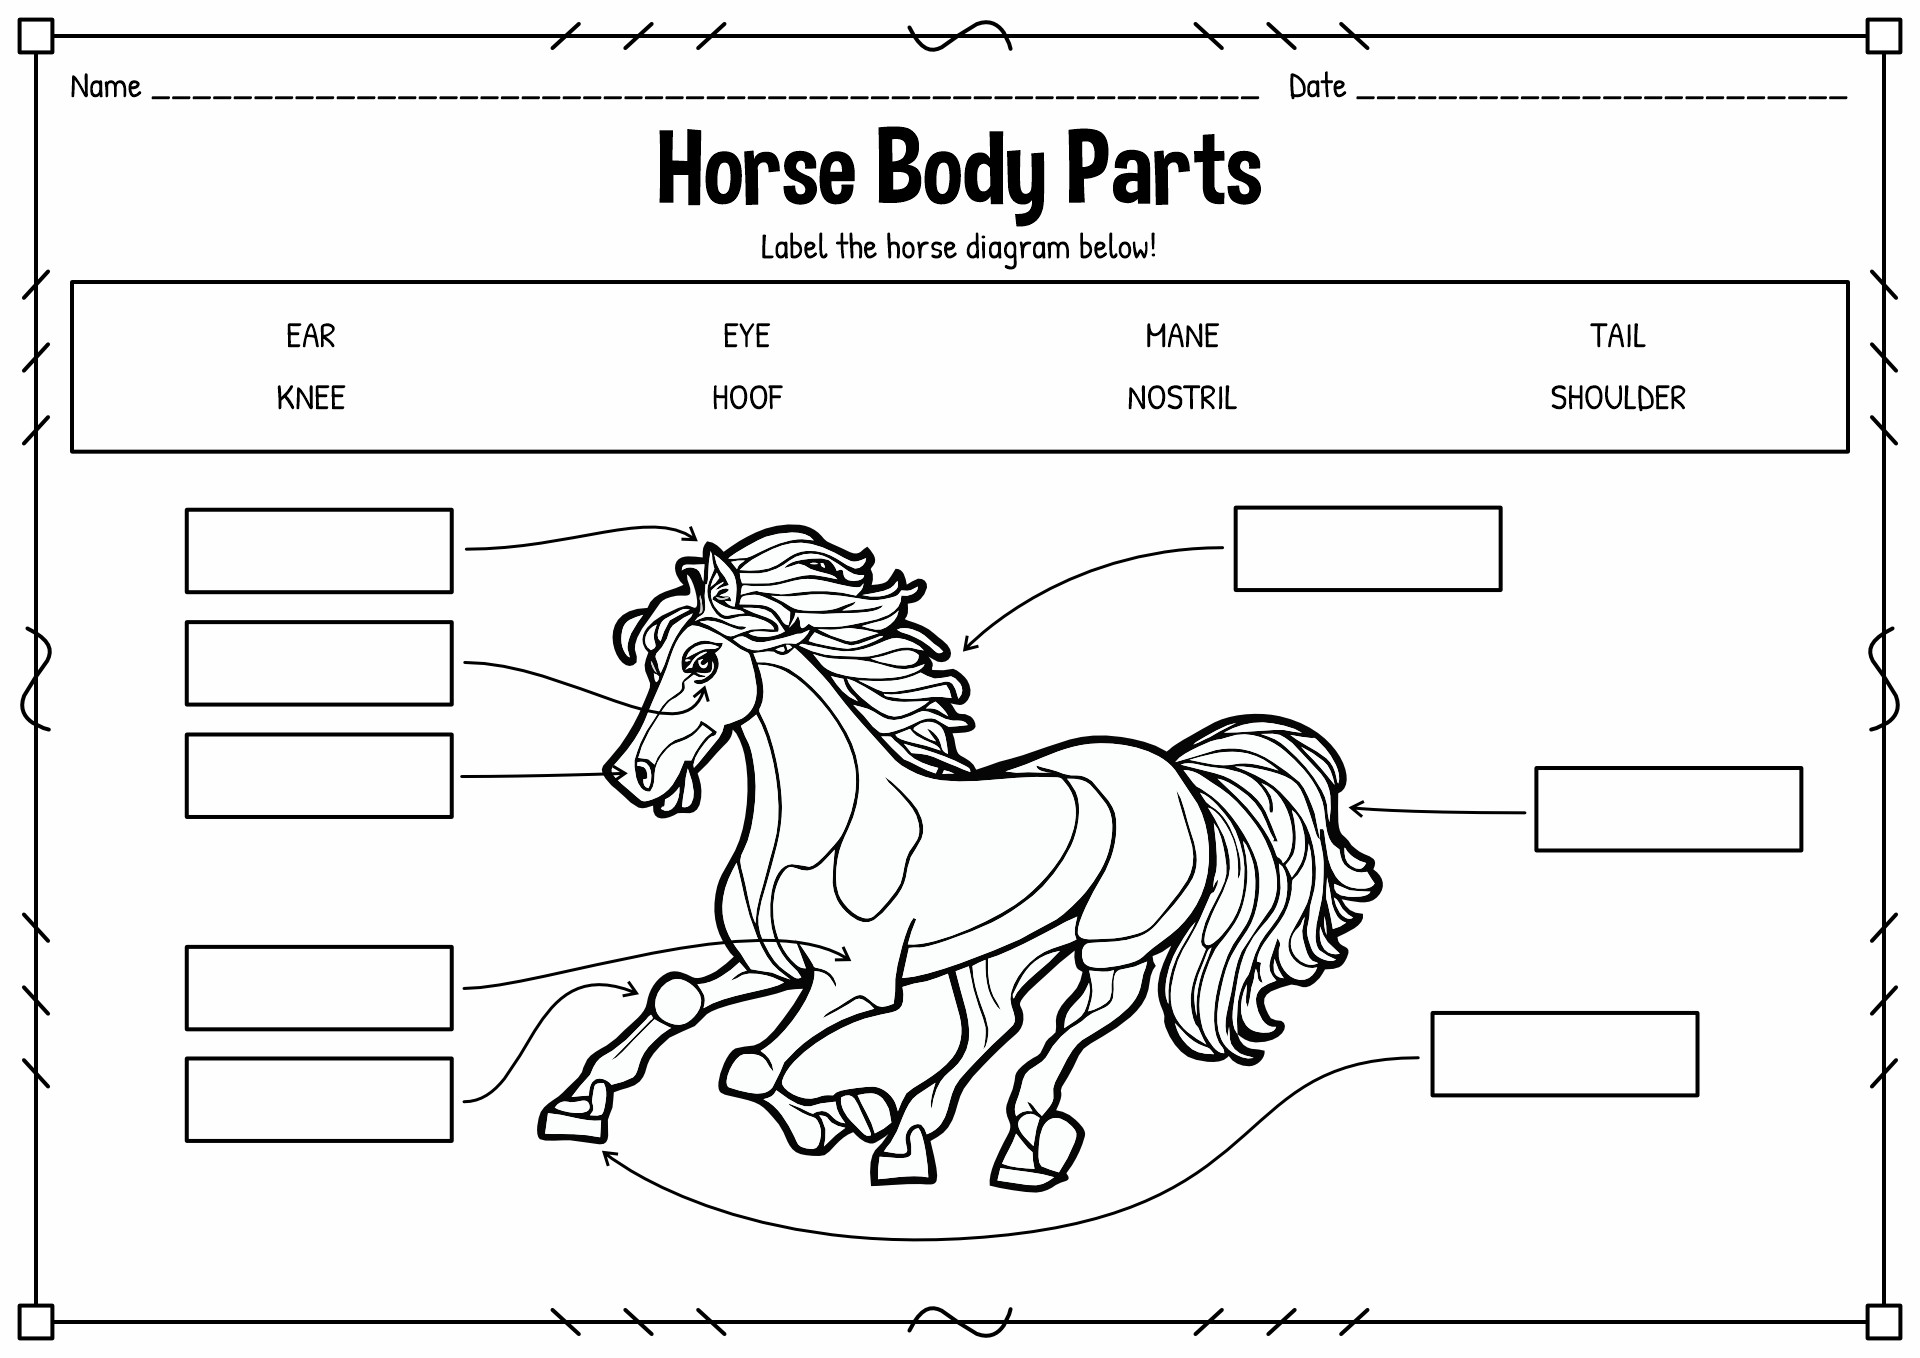 19 Best Images of Worksheet Parts Of A Horse Pony Club - Part Western ...